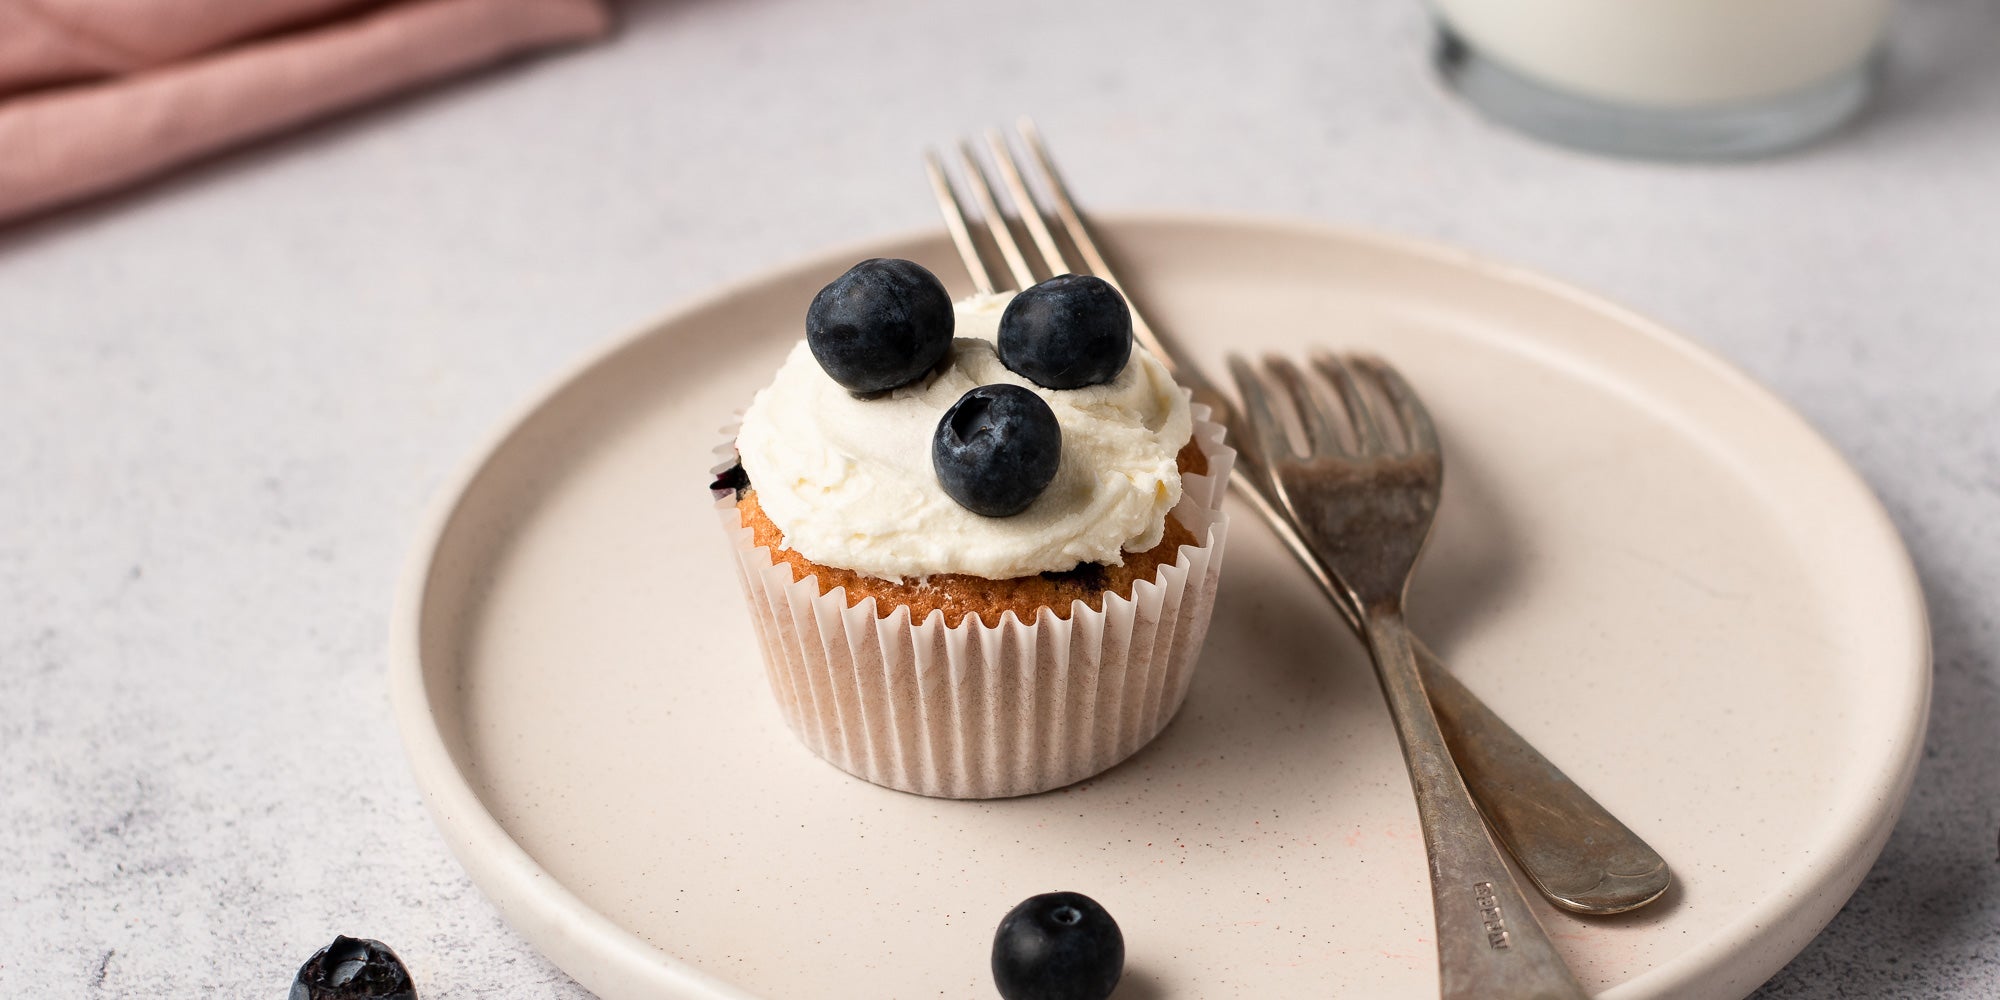 Cupcakes topped with icing and blueberries